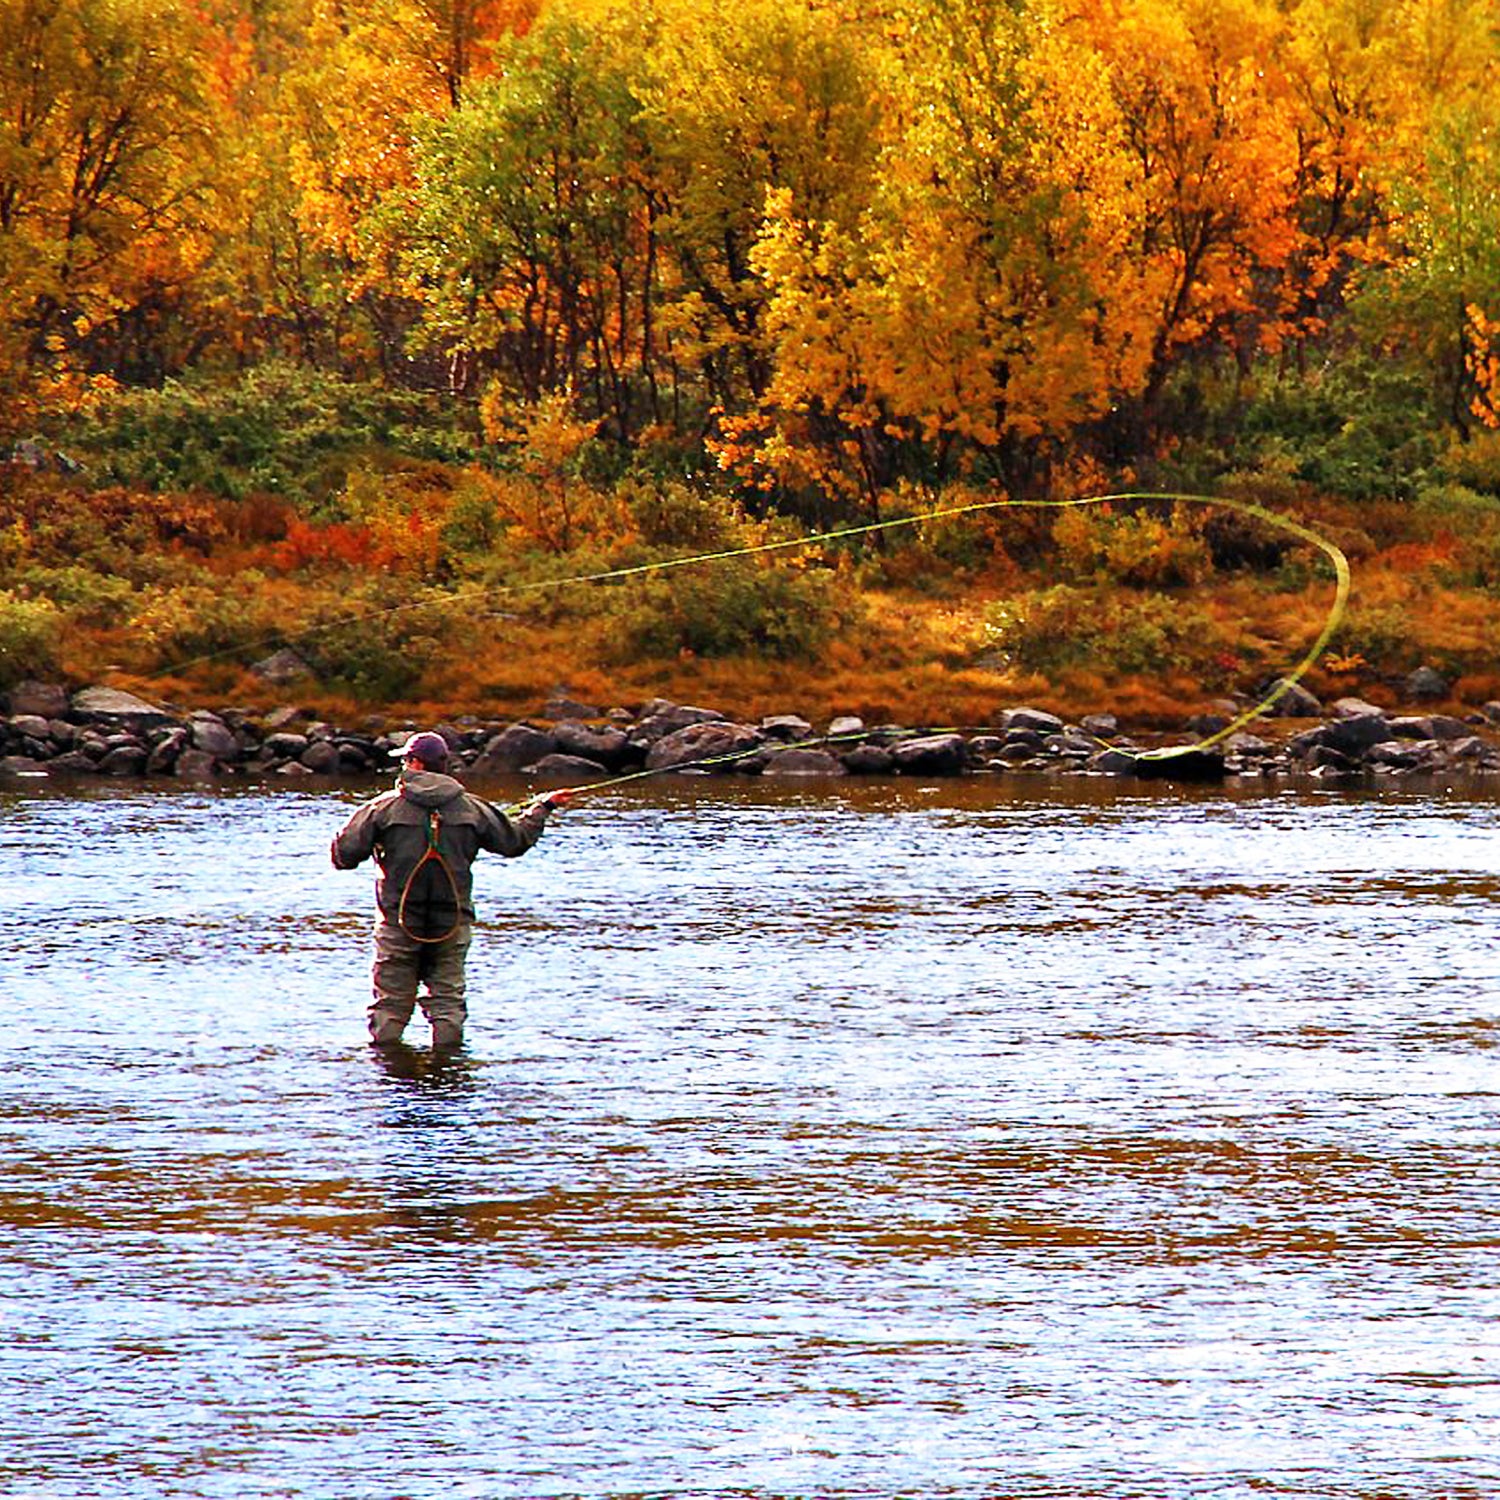 Can I Build a Fly-Fishing Kit This Fall for Less Than $500?